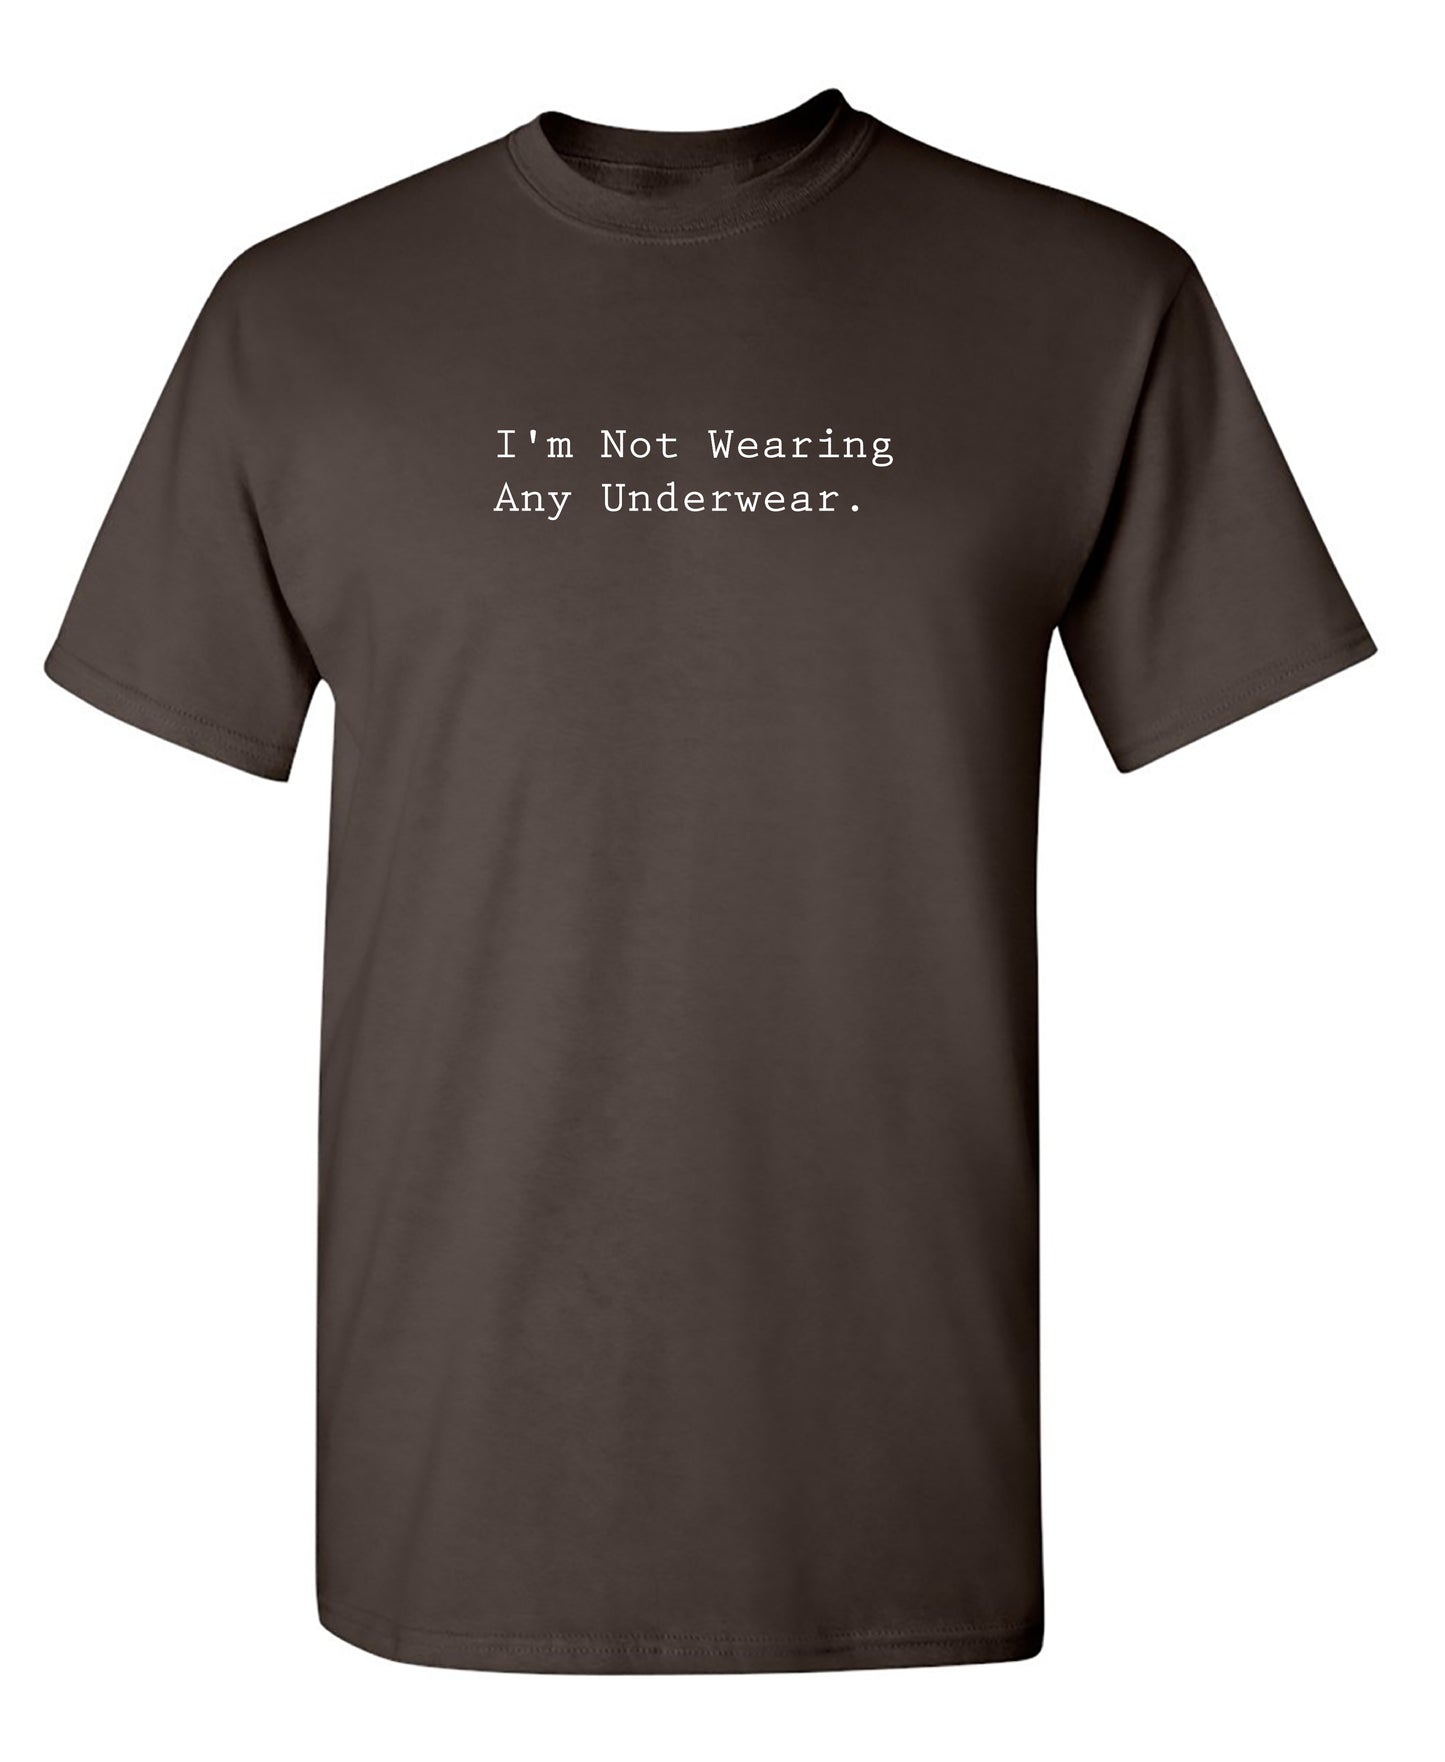 I'm Not Wearing Any Underwear. - Funny T Shirts & Graphic Tees